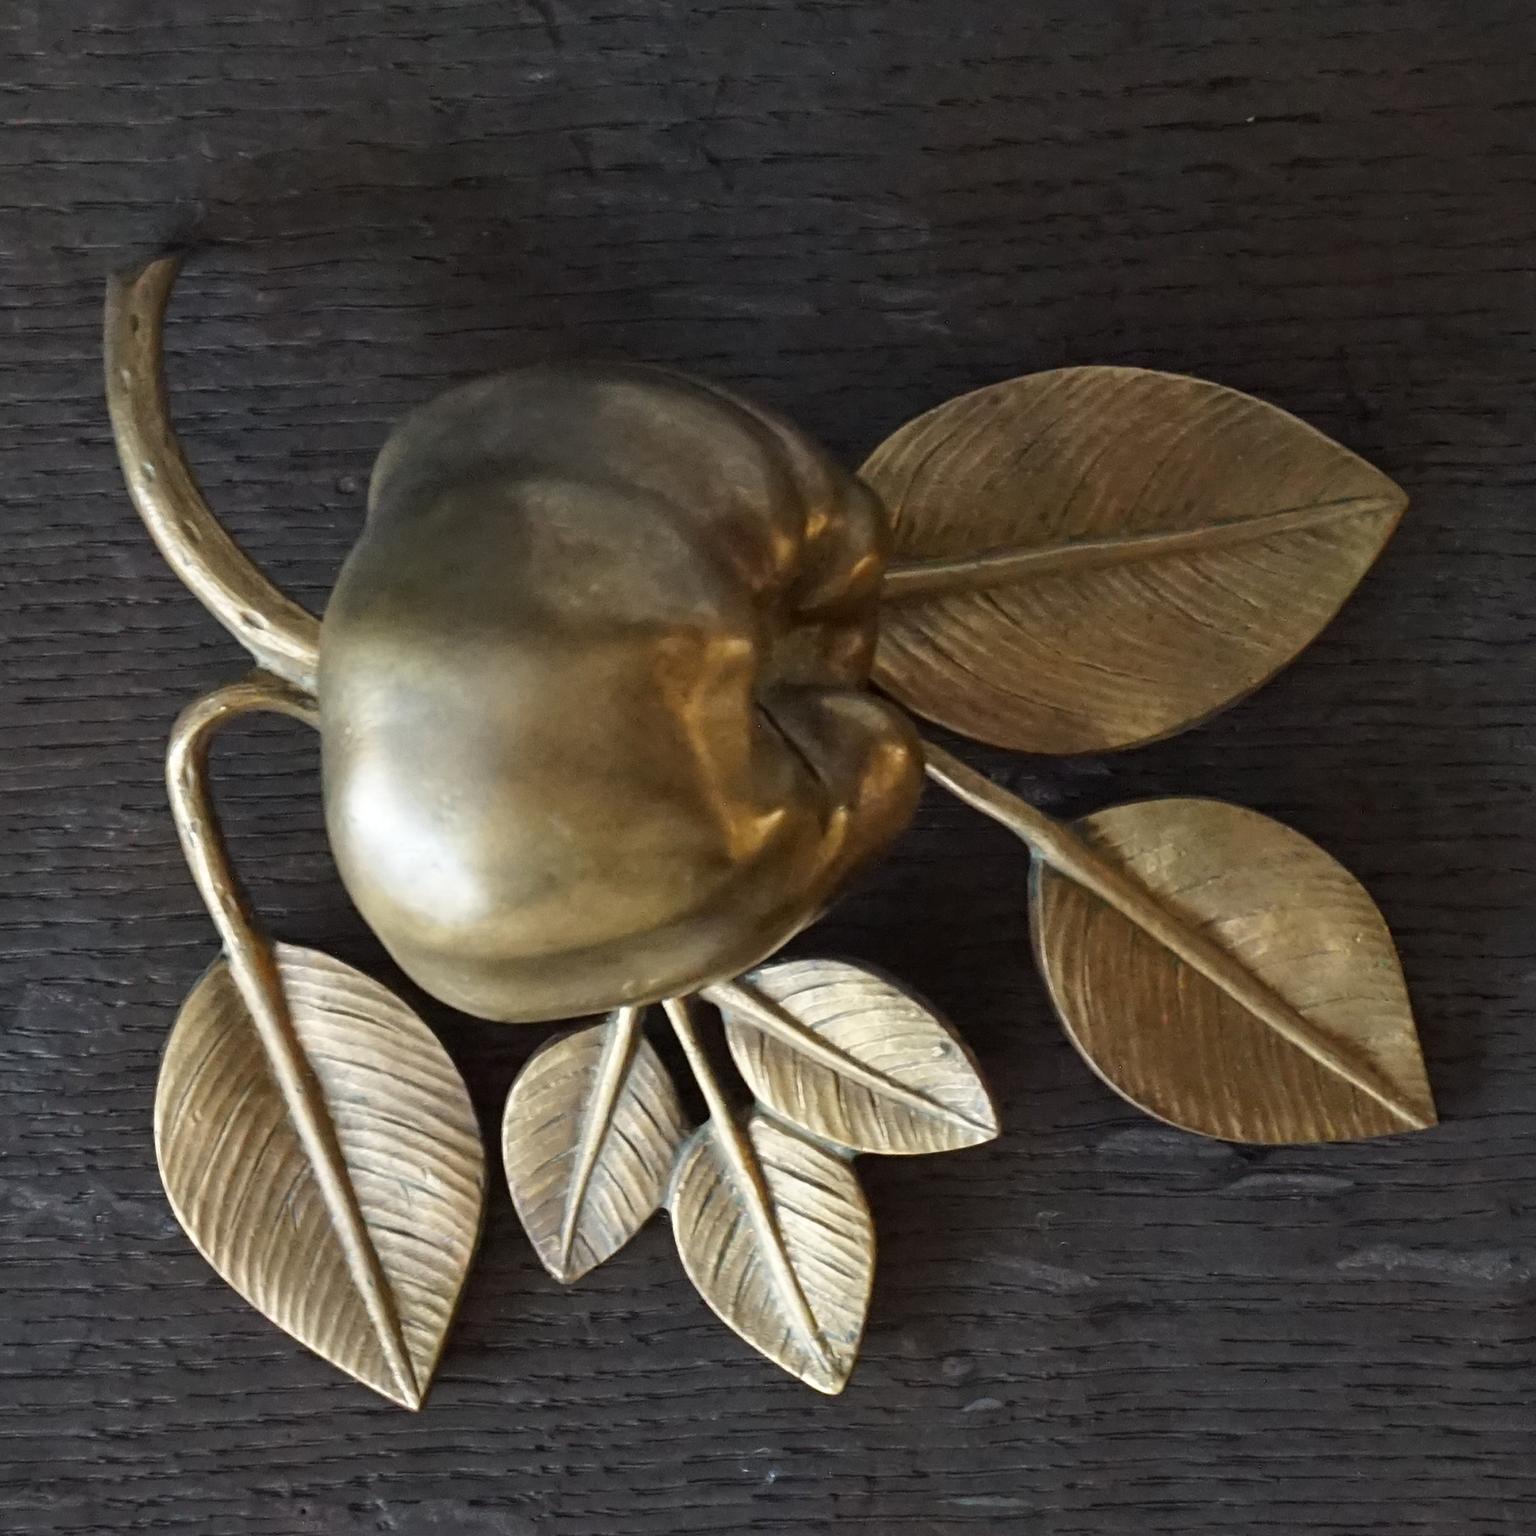 Antique hinged bronze patinated apple on a twig with leaves, to keep or collect your little trinkets in.
This used to be called a bed-apple, for putting your jewellery in on your nightstand before going to bed. But evidently they also where often